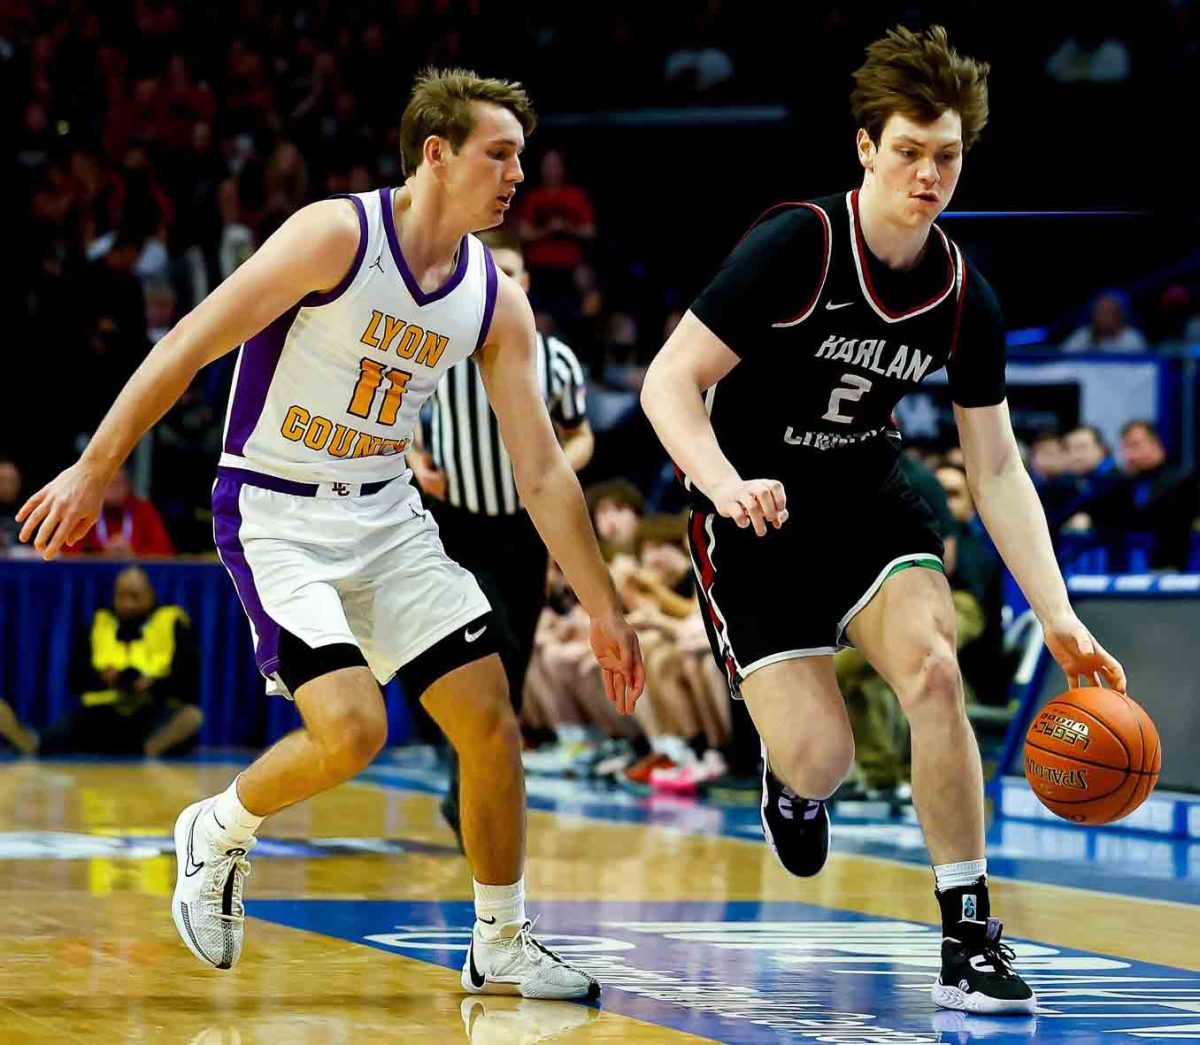 Harlan+County+guard+brought+the+ball+down+the+court+against+Lyon+Countys+Travis+Perry+in+the+state+championship+game+last+month.+Both+Noah+and+Perry%2C+the+states+top+two+players+in+the+Class+of+2024%2C+will+play+at+the+University+of+Kentucky+next+season.